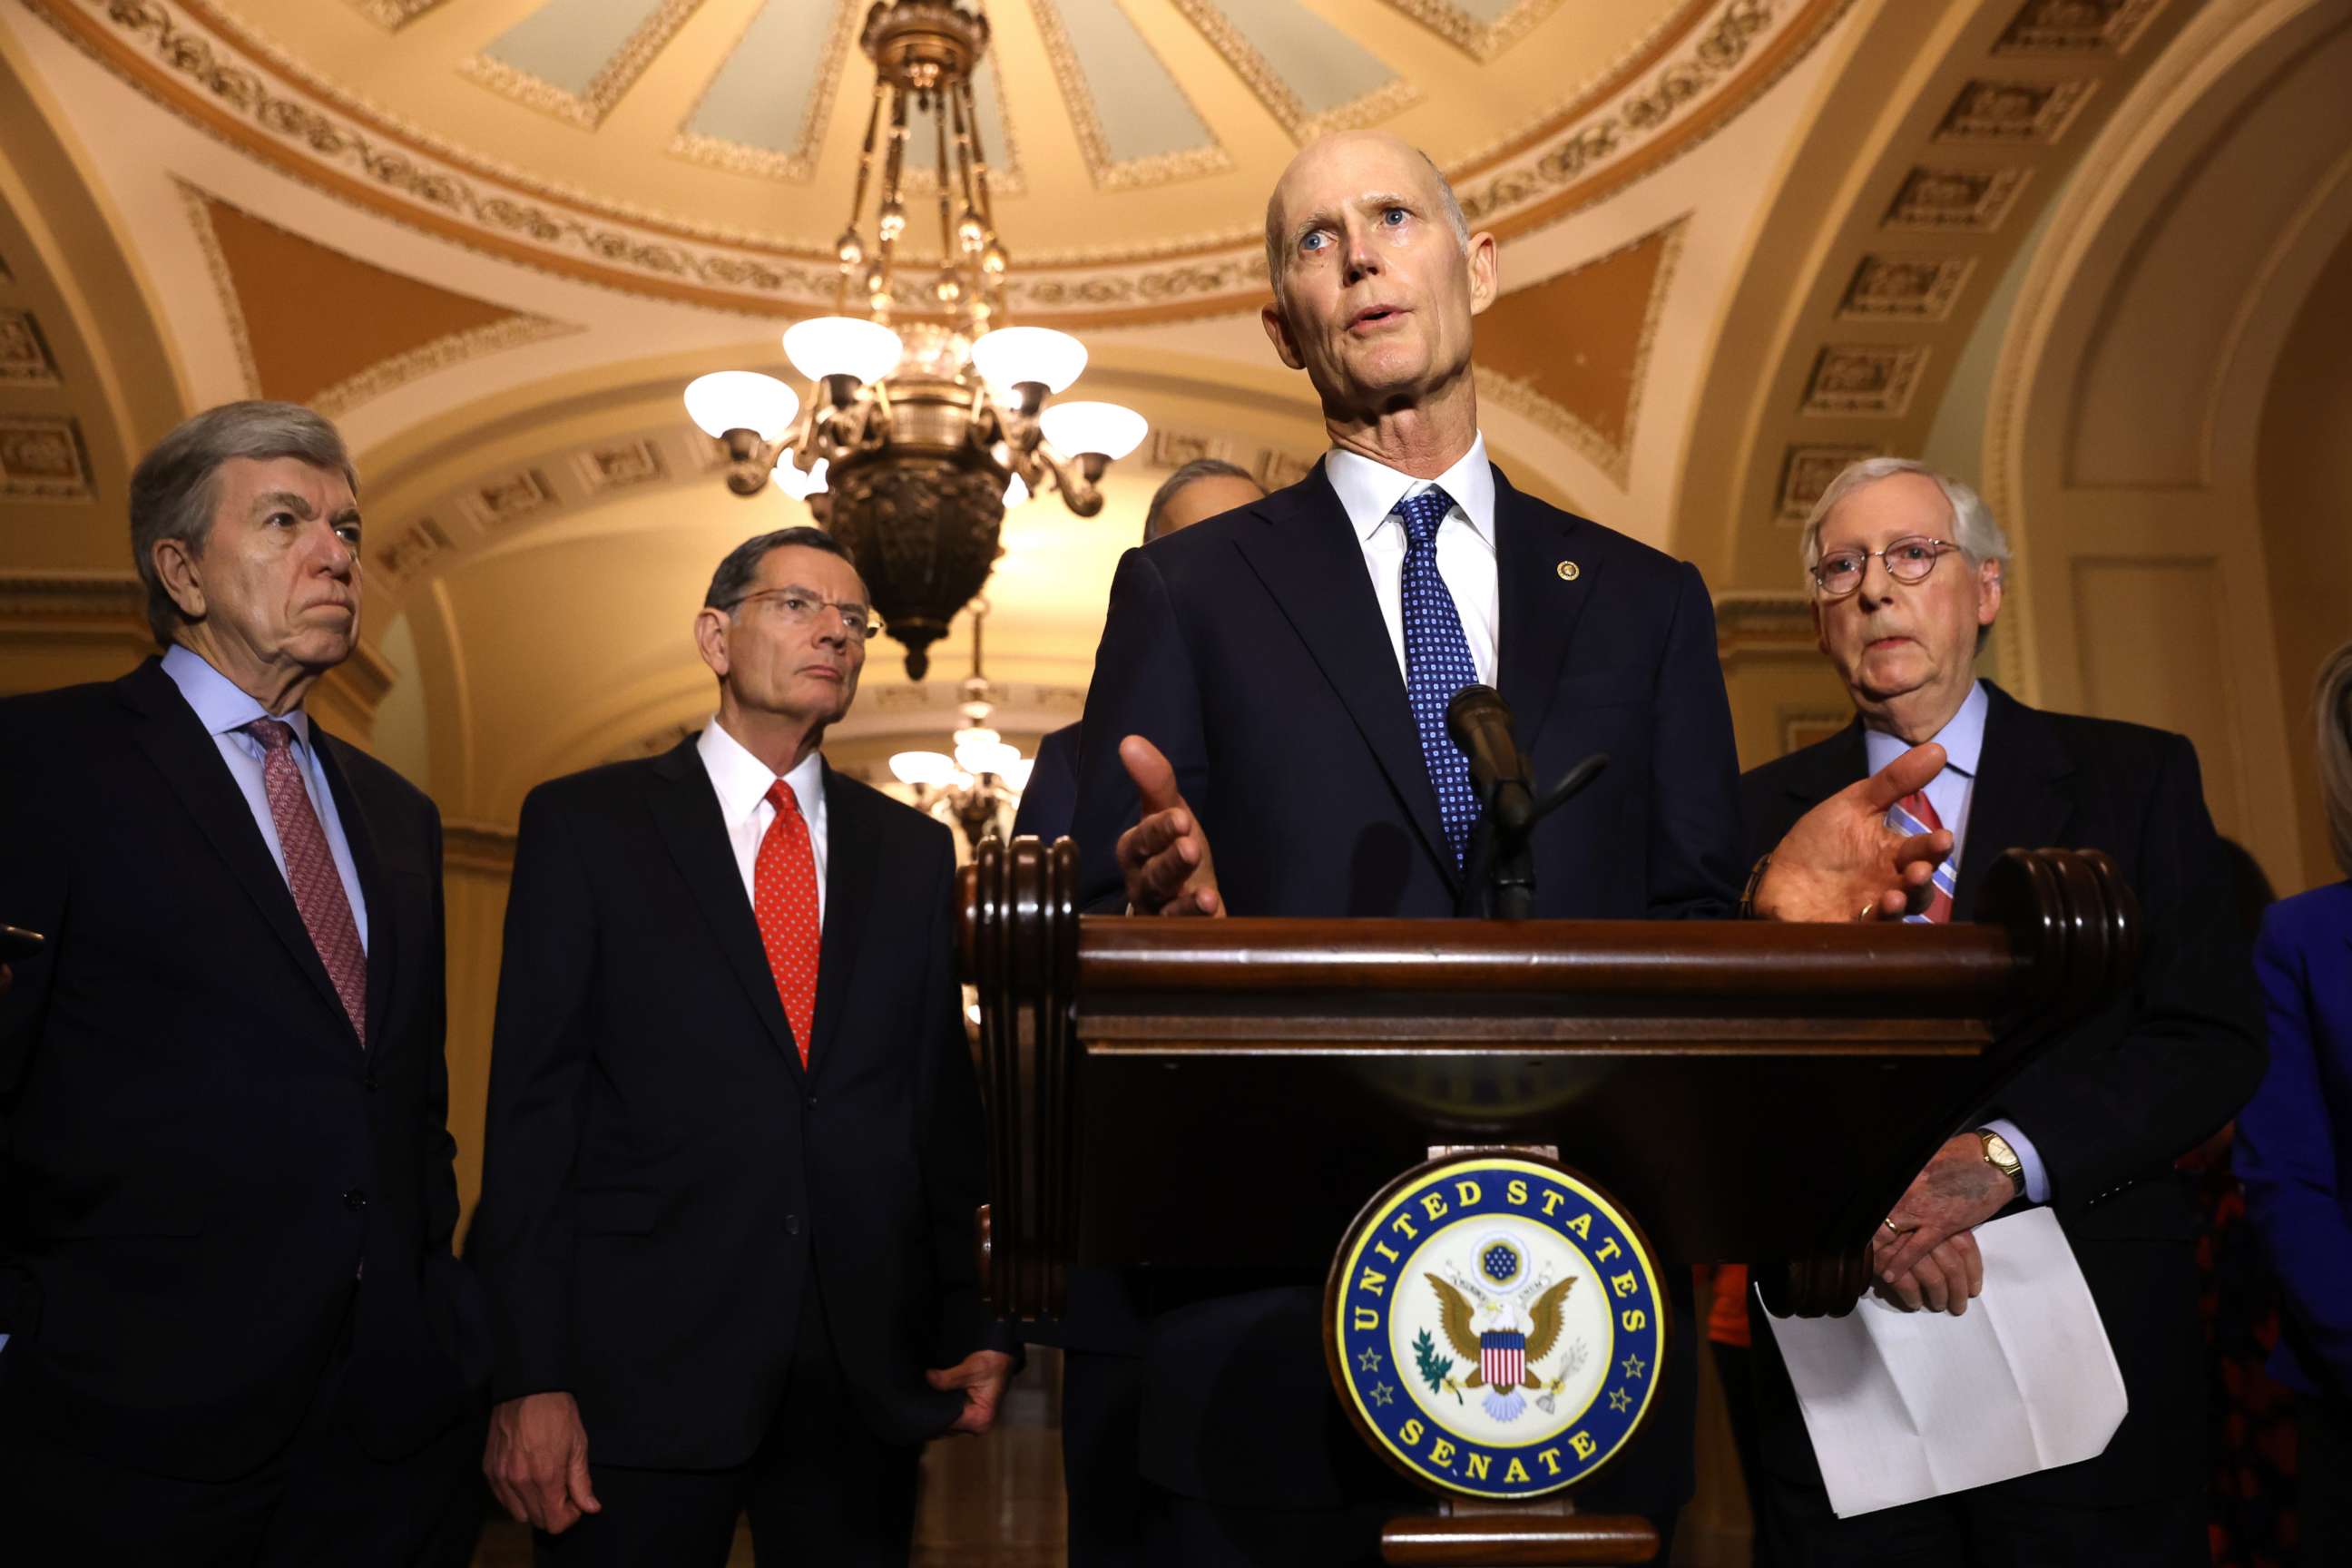 PHOTO: Sen. Rick Scott speaks to the media as Minority Leader Mitch McConnell looks on following the weekly Republican policy luncheon at the U.S. Capito, March 1, 2022 in Washington, DC.